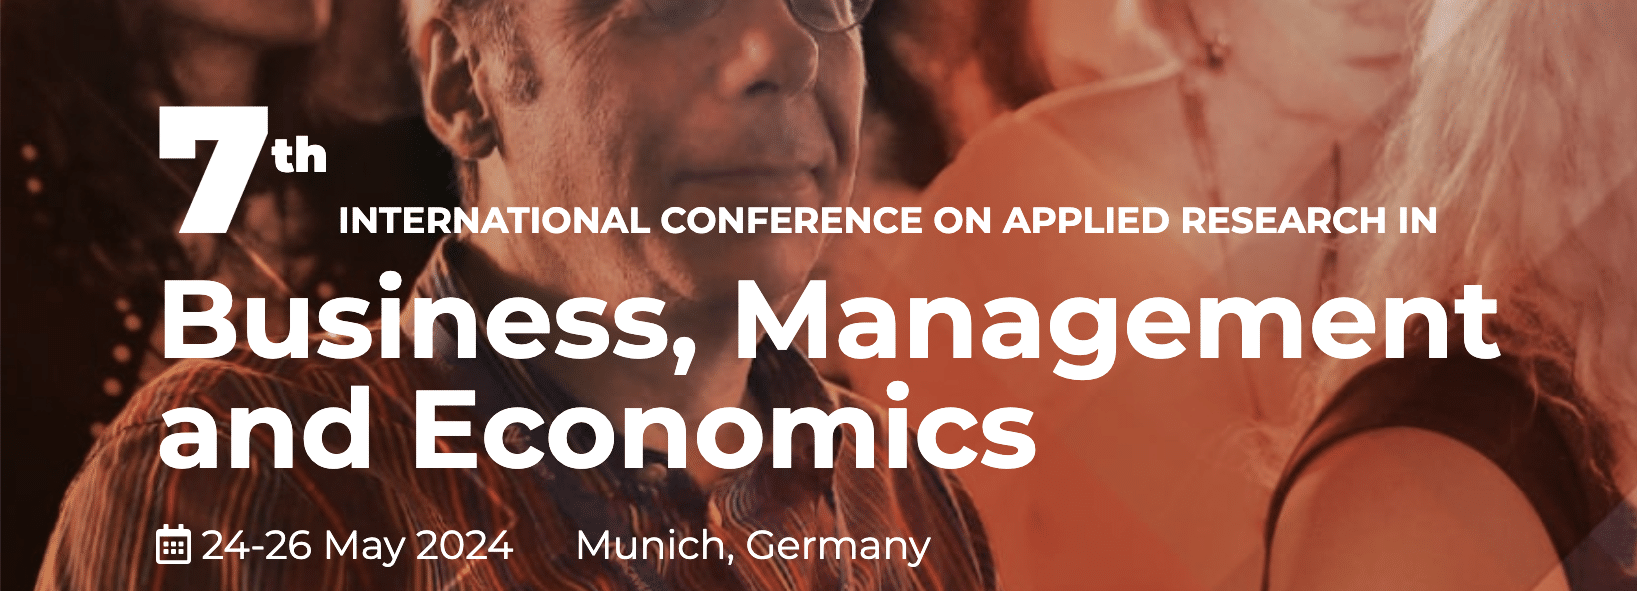 7th INTERNATIONAL CONFERENCE ON APPLIED RESEARCH IN Business, Management and Economics(BMECONF), Munich, Germany